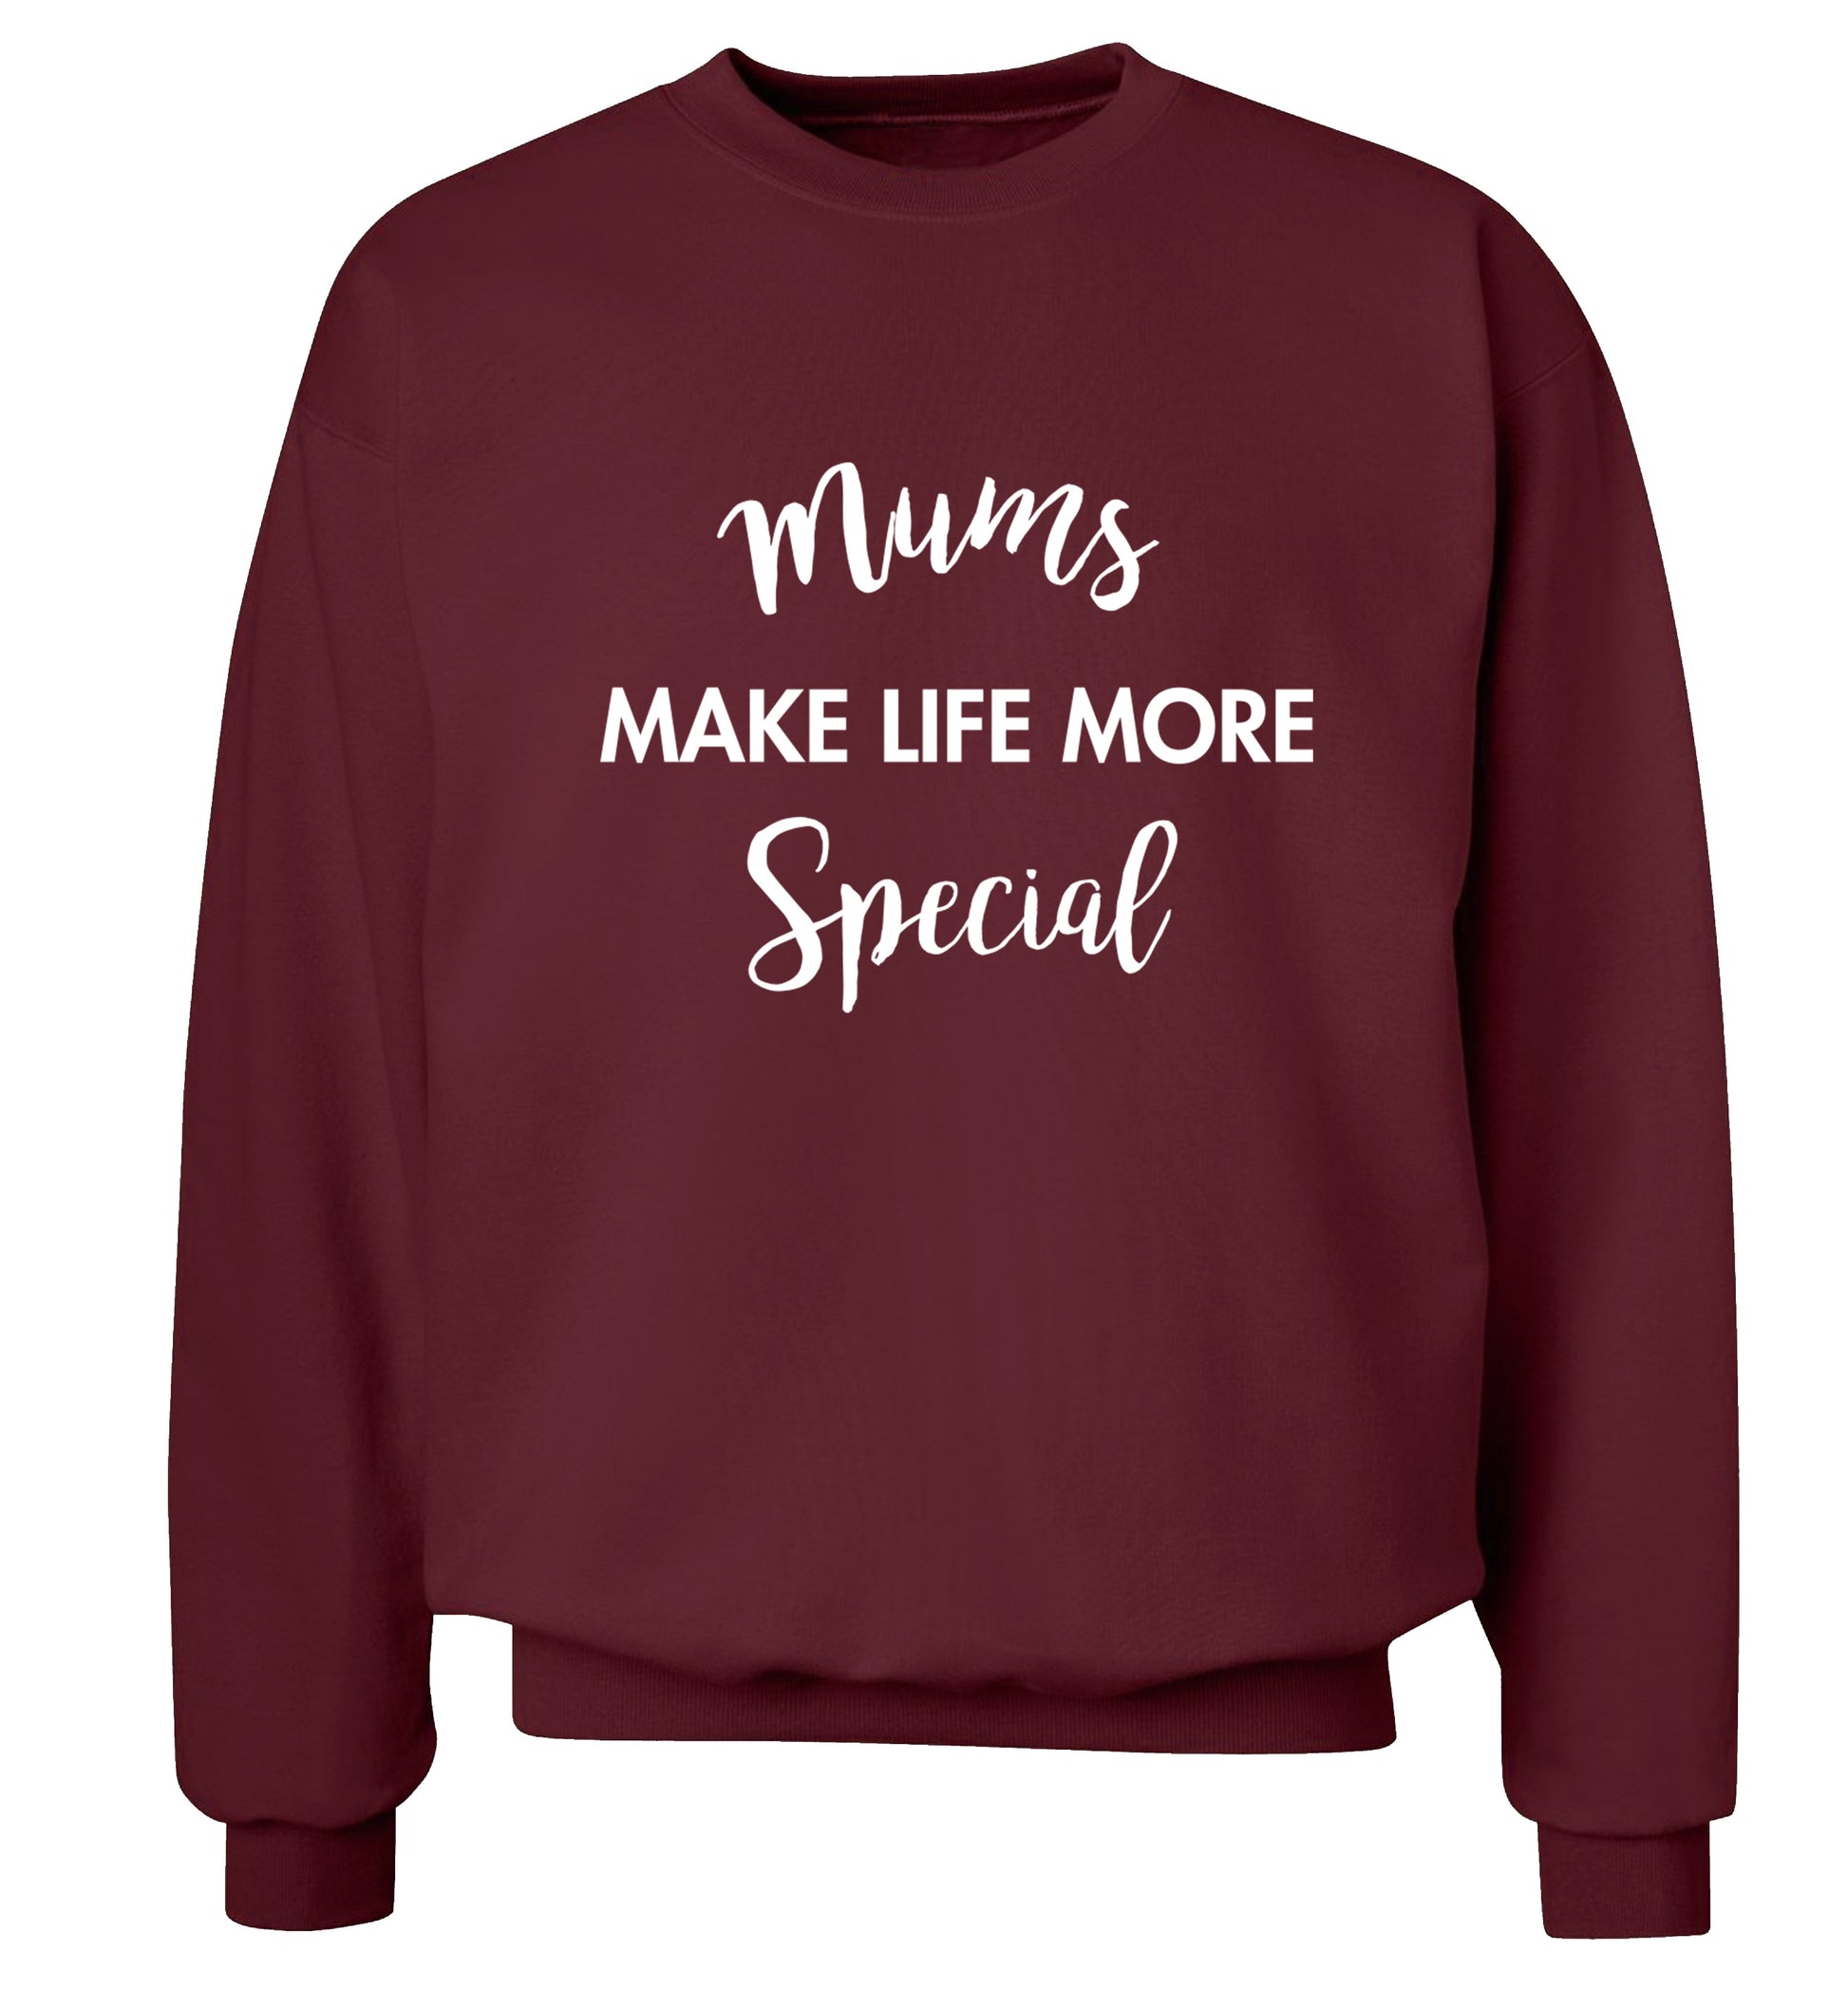 Mum's make life more special adult's unisex maroon sweater 2XL